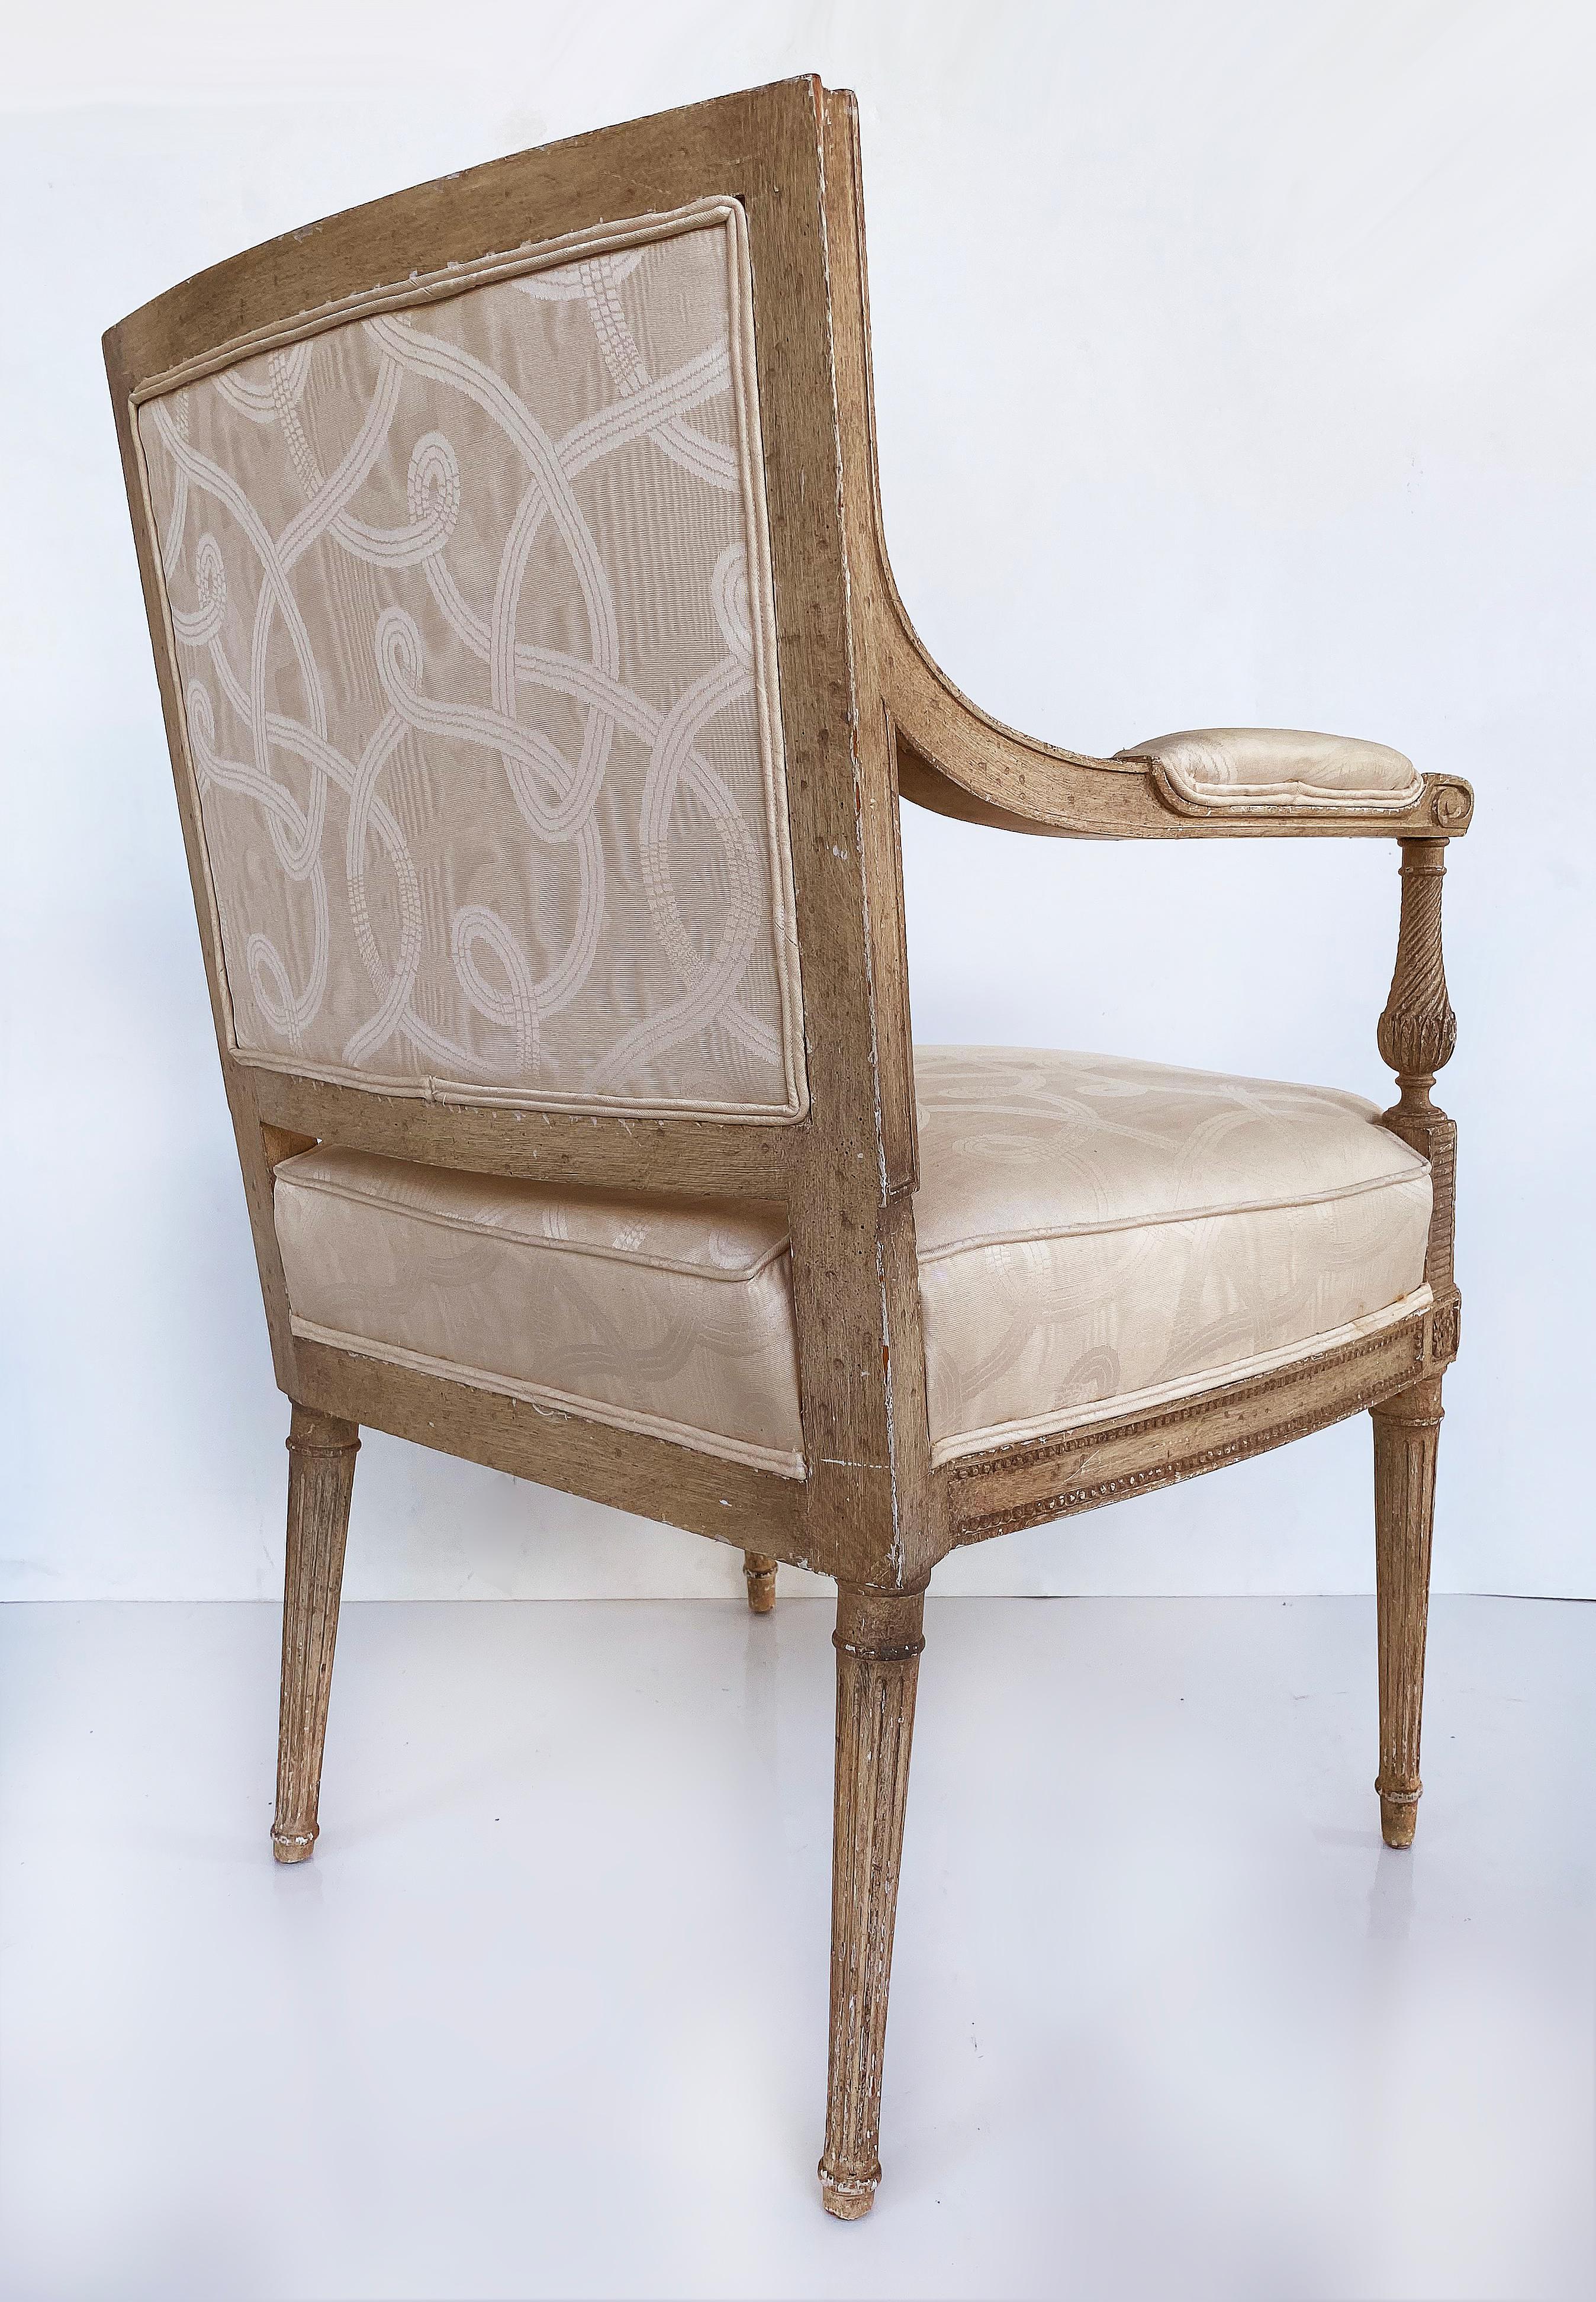 French Louis XVI Style Painted Fauteuil Armchairs, Late 19th Century -Early 20th For Sale 2